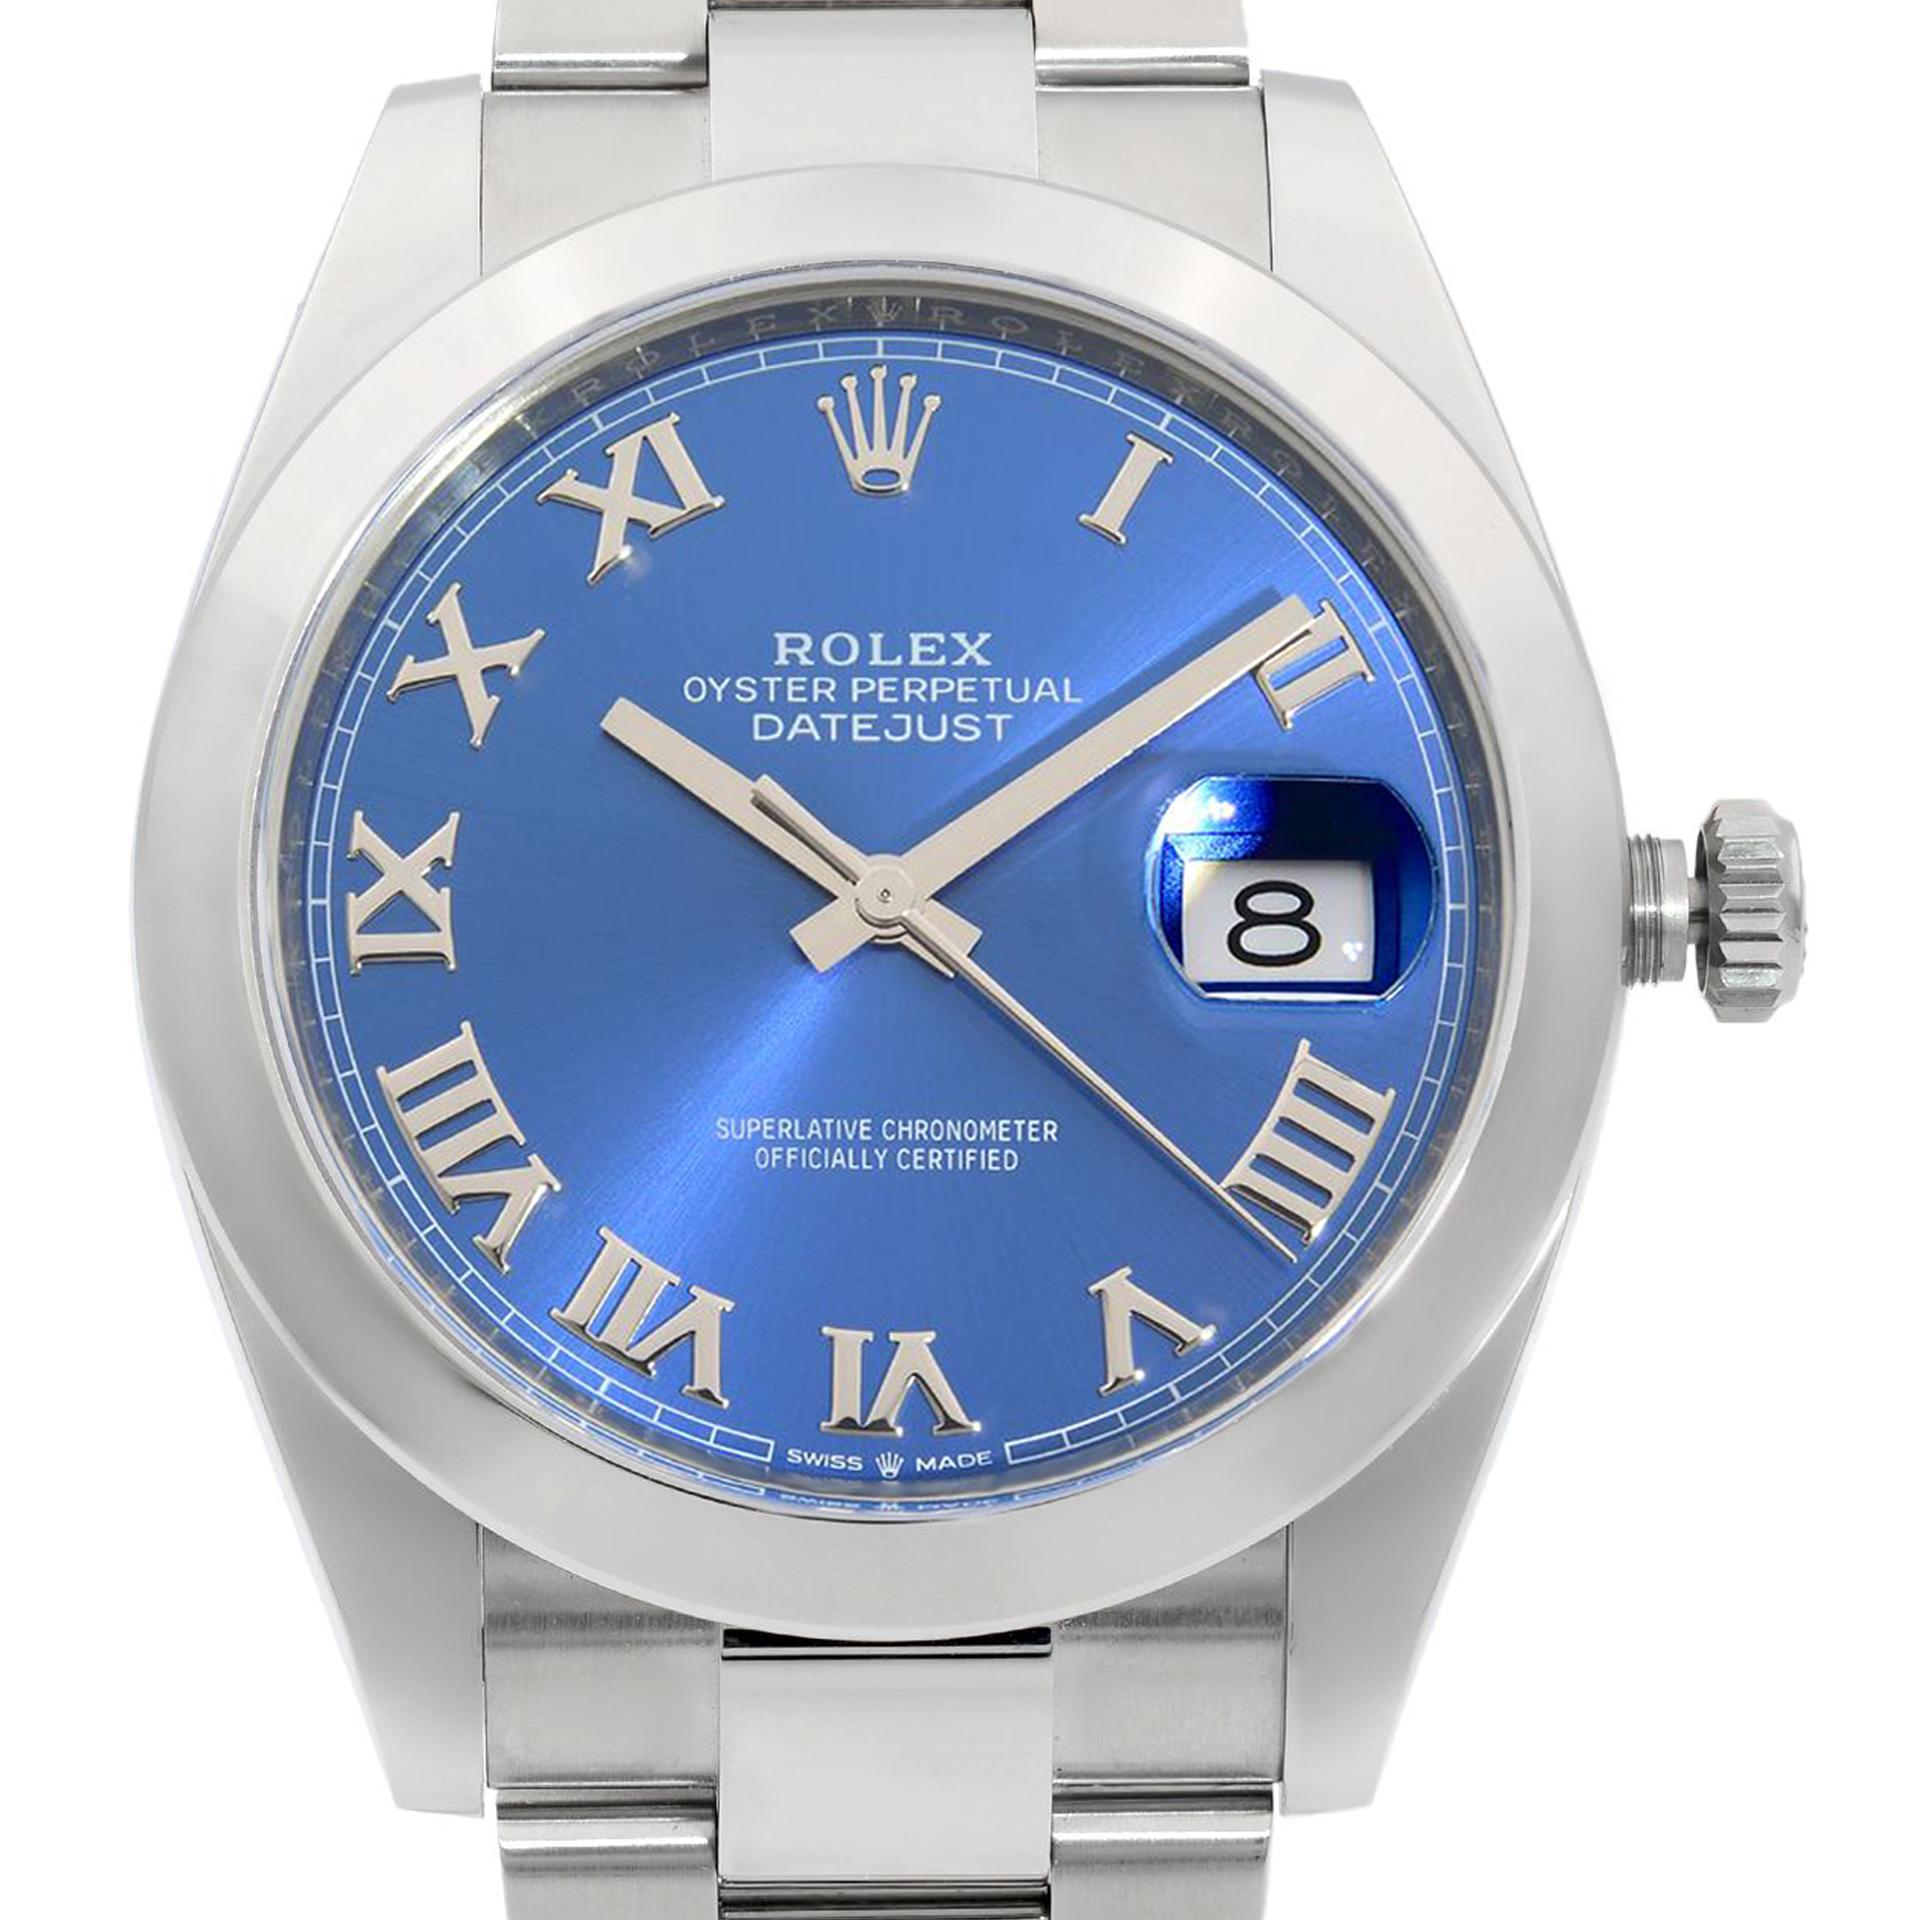 Unworn Rolex Datejust 41 Steel Blue Roman Dial Automatic Mens Watch 126300. Comes with a 2021 Card.  This Beautiful Timepiece is Powered by a Mechanical (Automatic) Movement and Features: Stainless Steel Case and Bracelet, Fixed Smooth Stainless